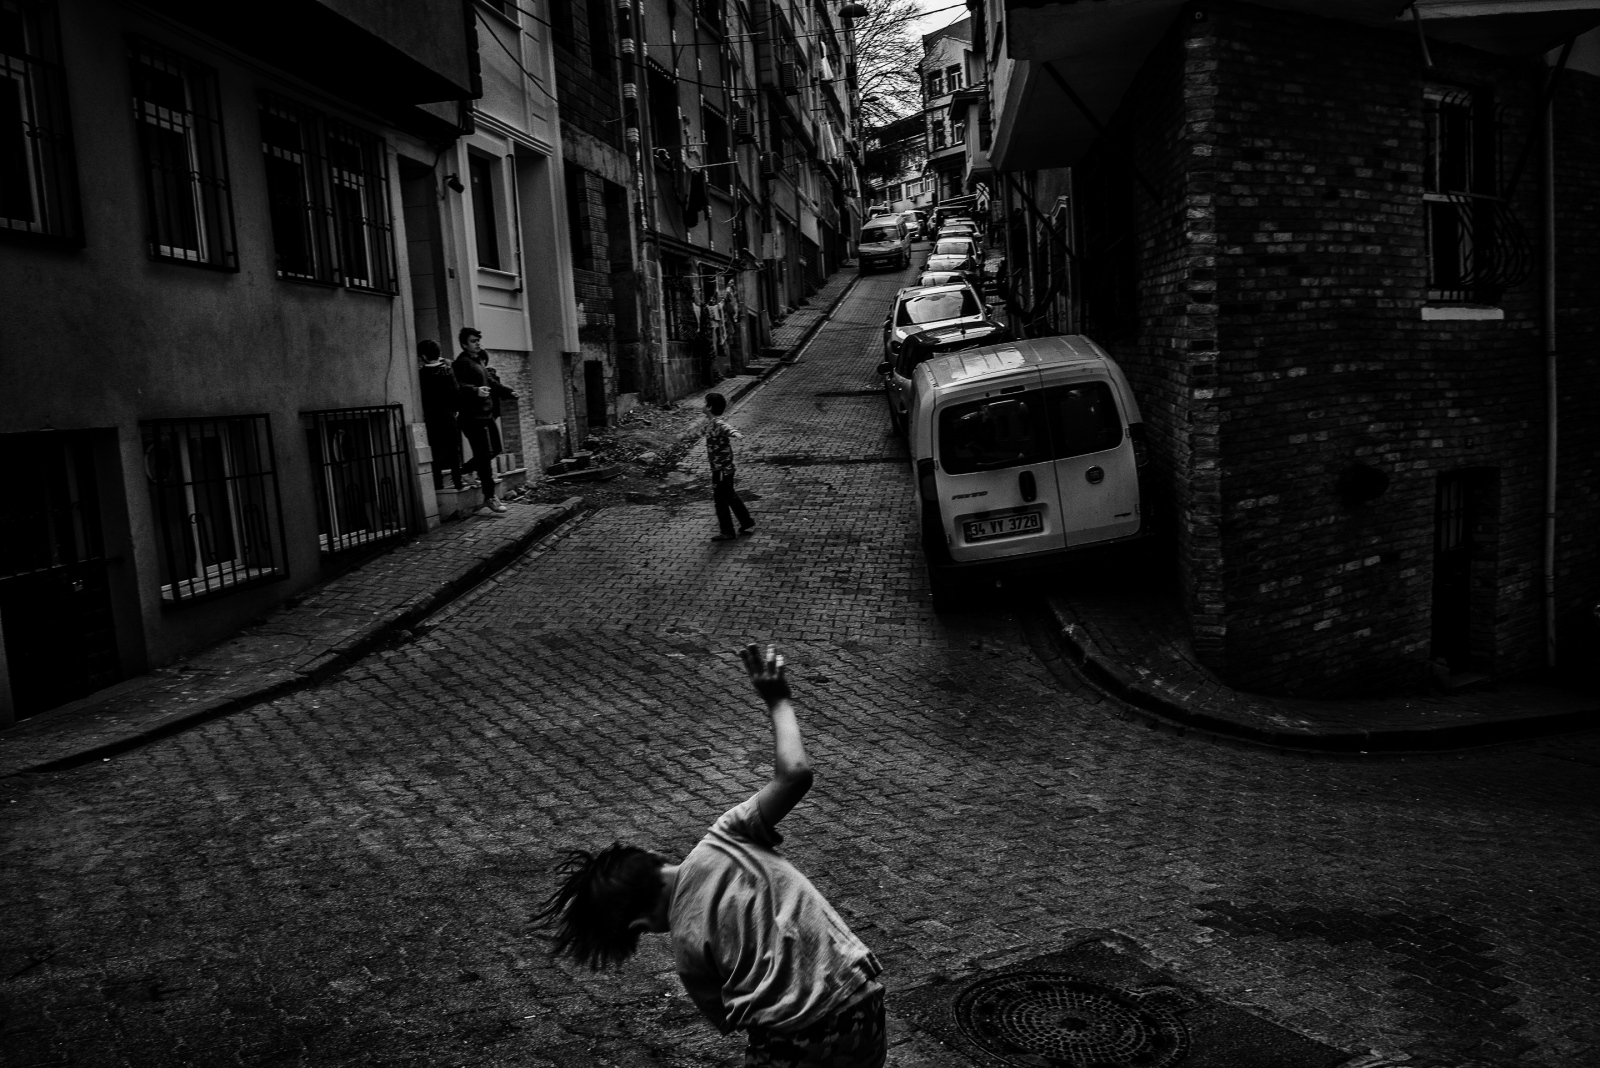 Istanbul old town | Buy this image